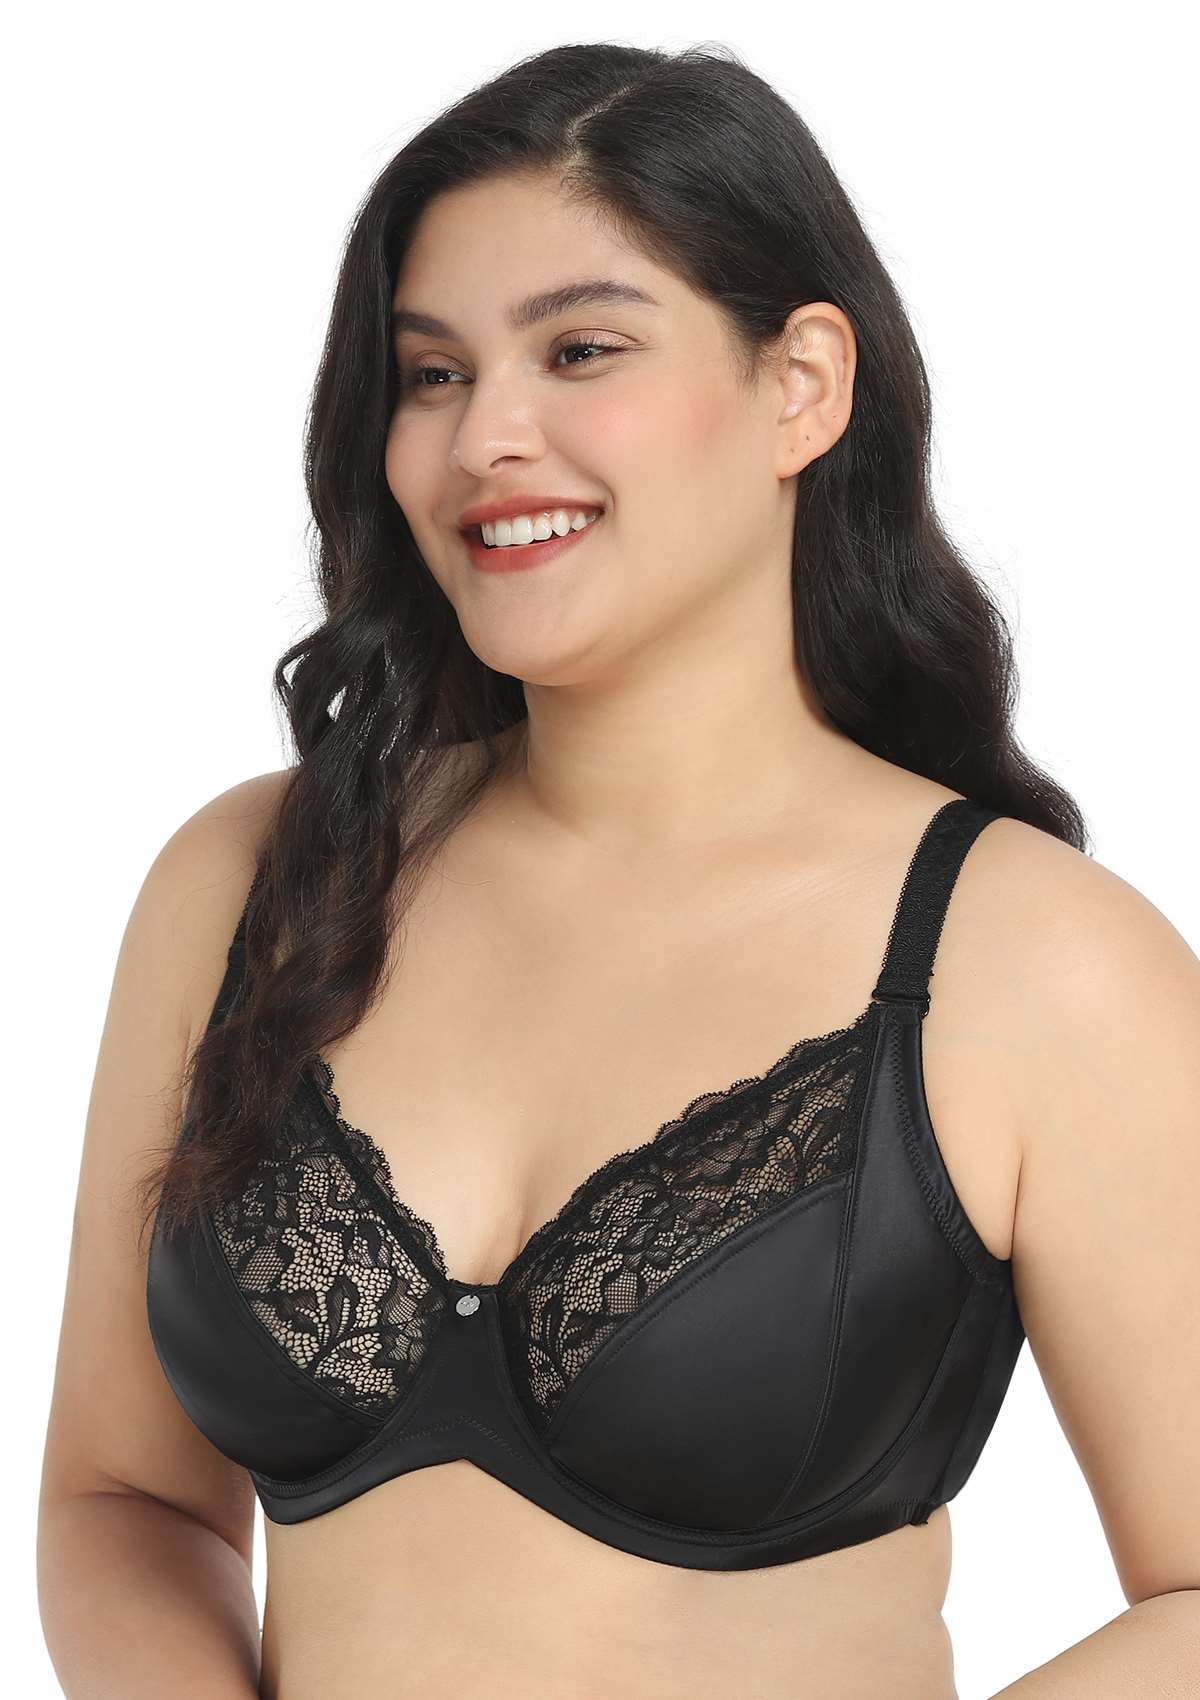 HSIA Foxy Satin Silky Full Coverage Underwire Bra With Floral Lace Trim - Black / 38 / G